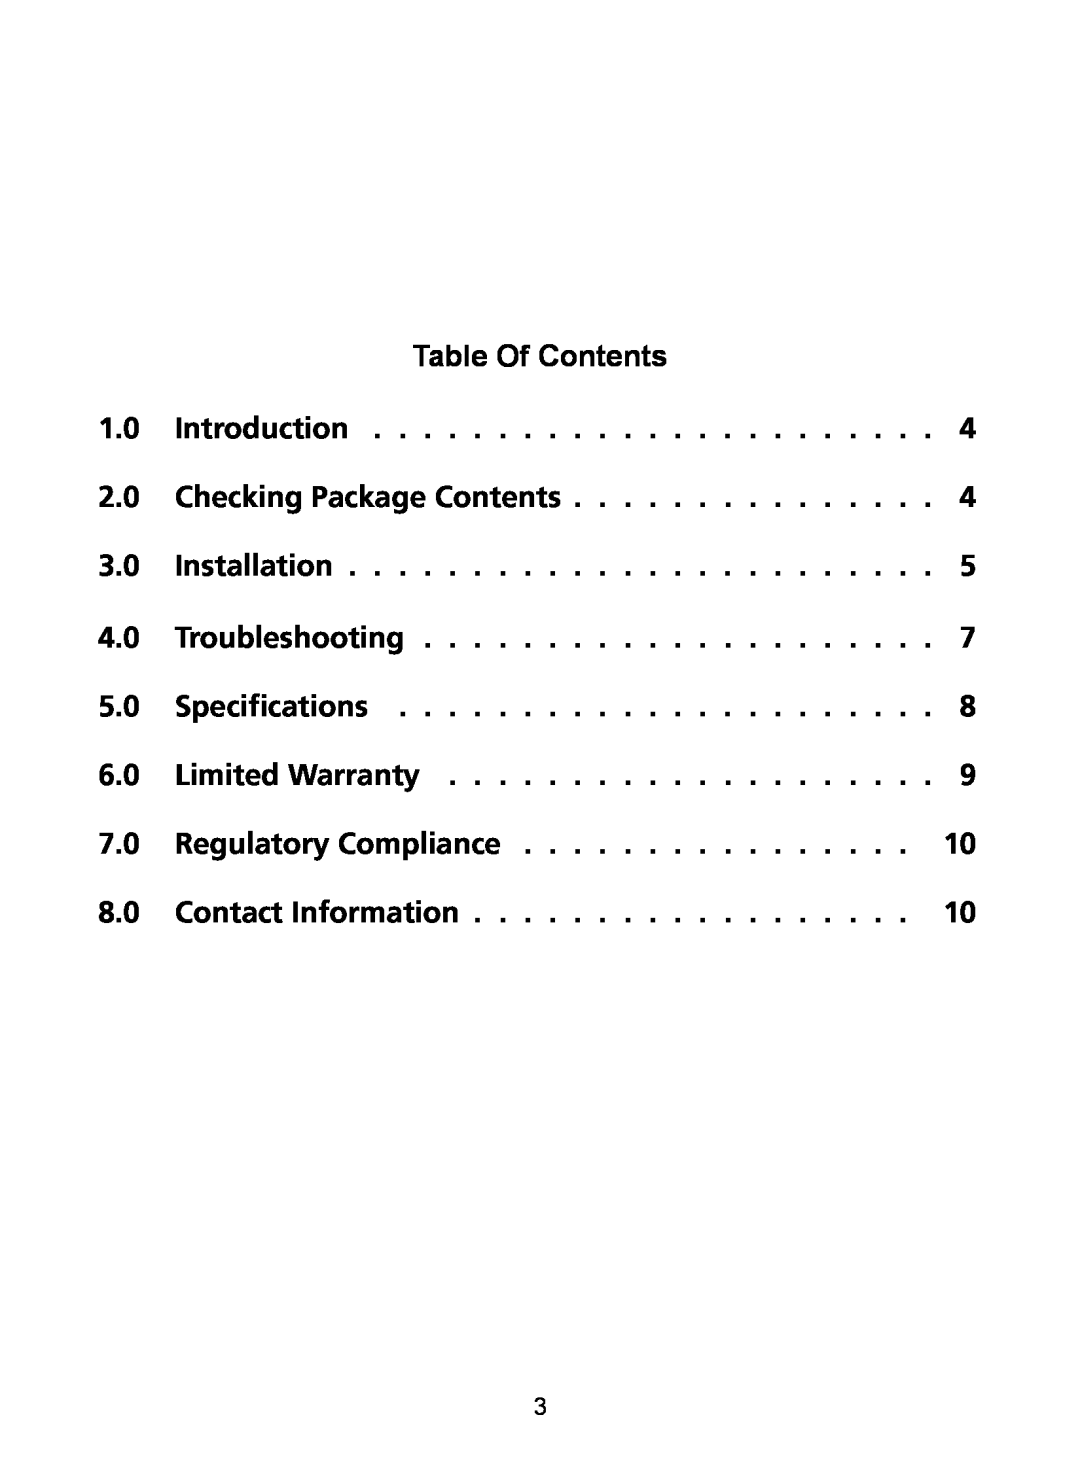 Audio Authority EDP-11 Table Of Contents 1.0 Introduction 2.0 Checking Package Contents, Installation 4.0 Troubleshooting 